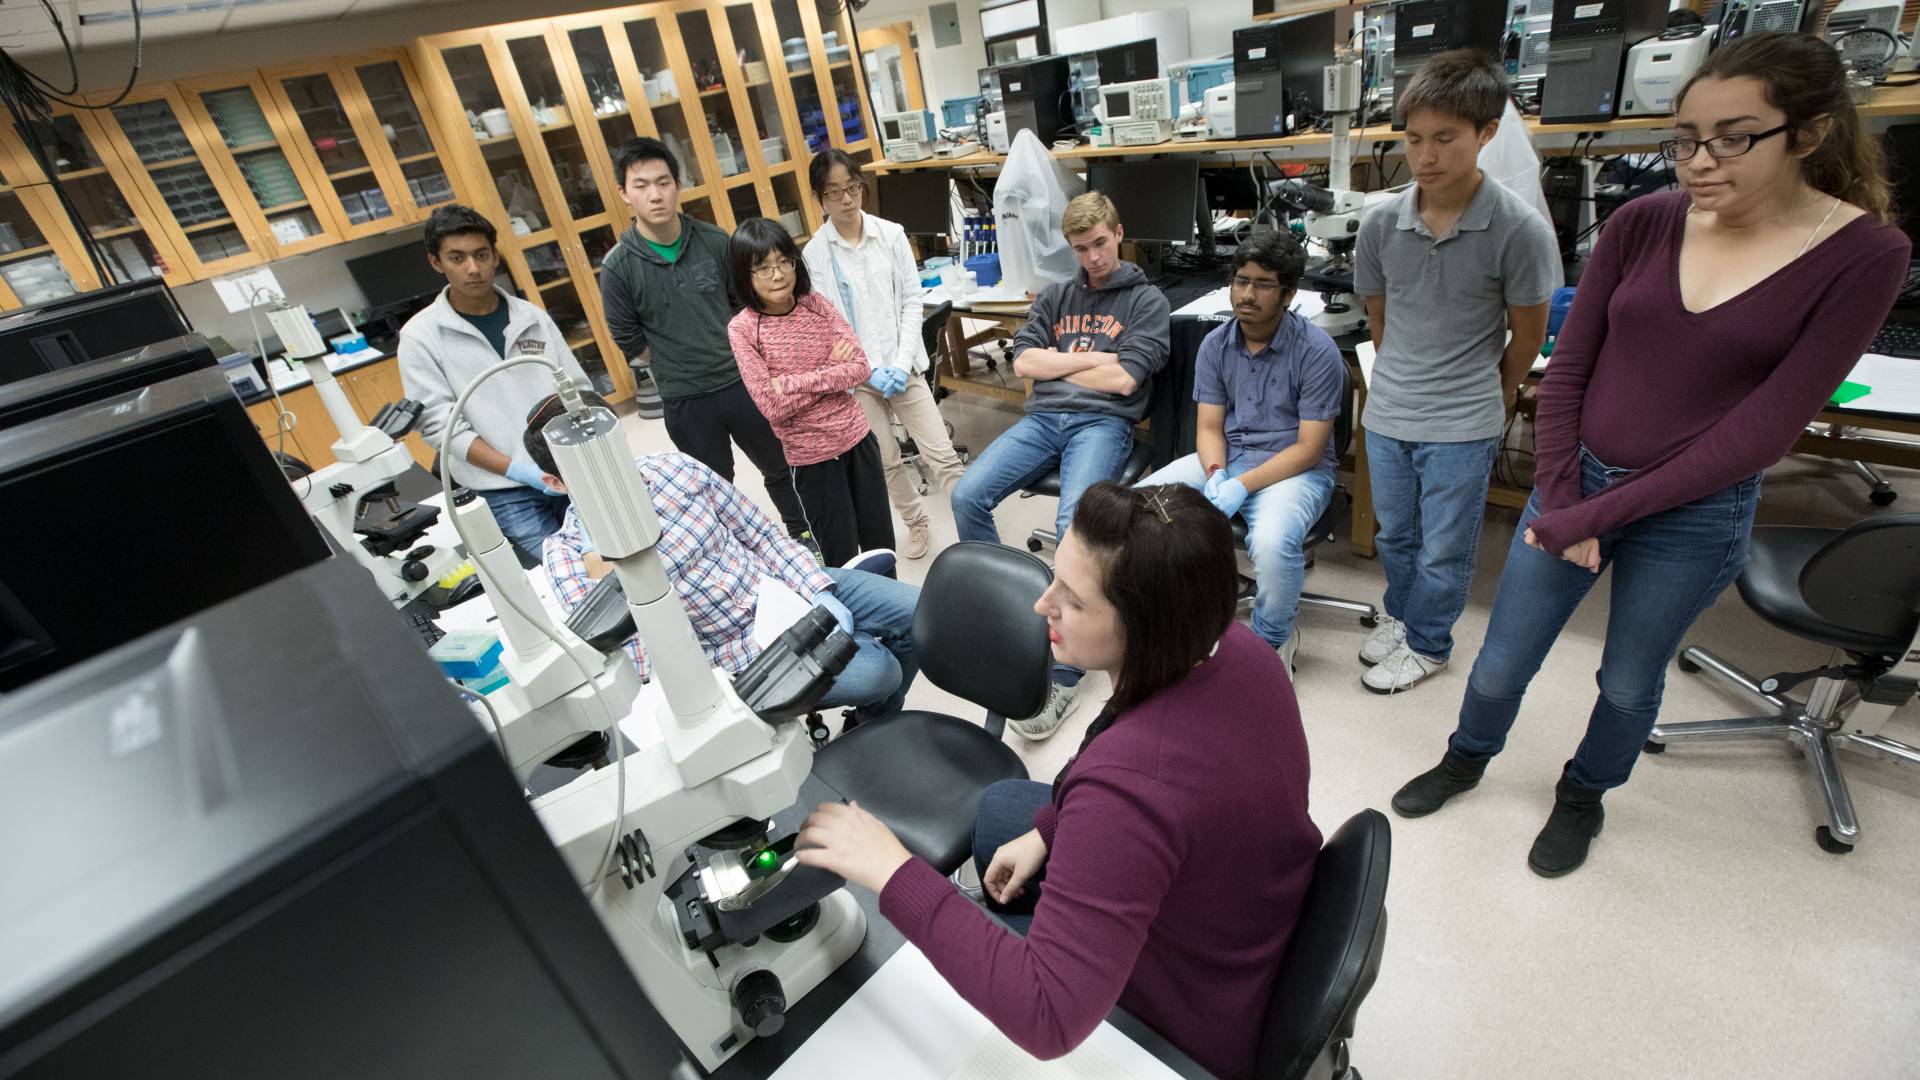 Students watching microscope demonstration in lab